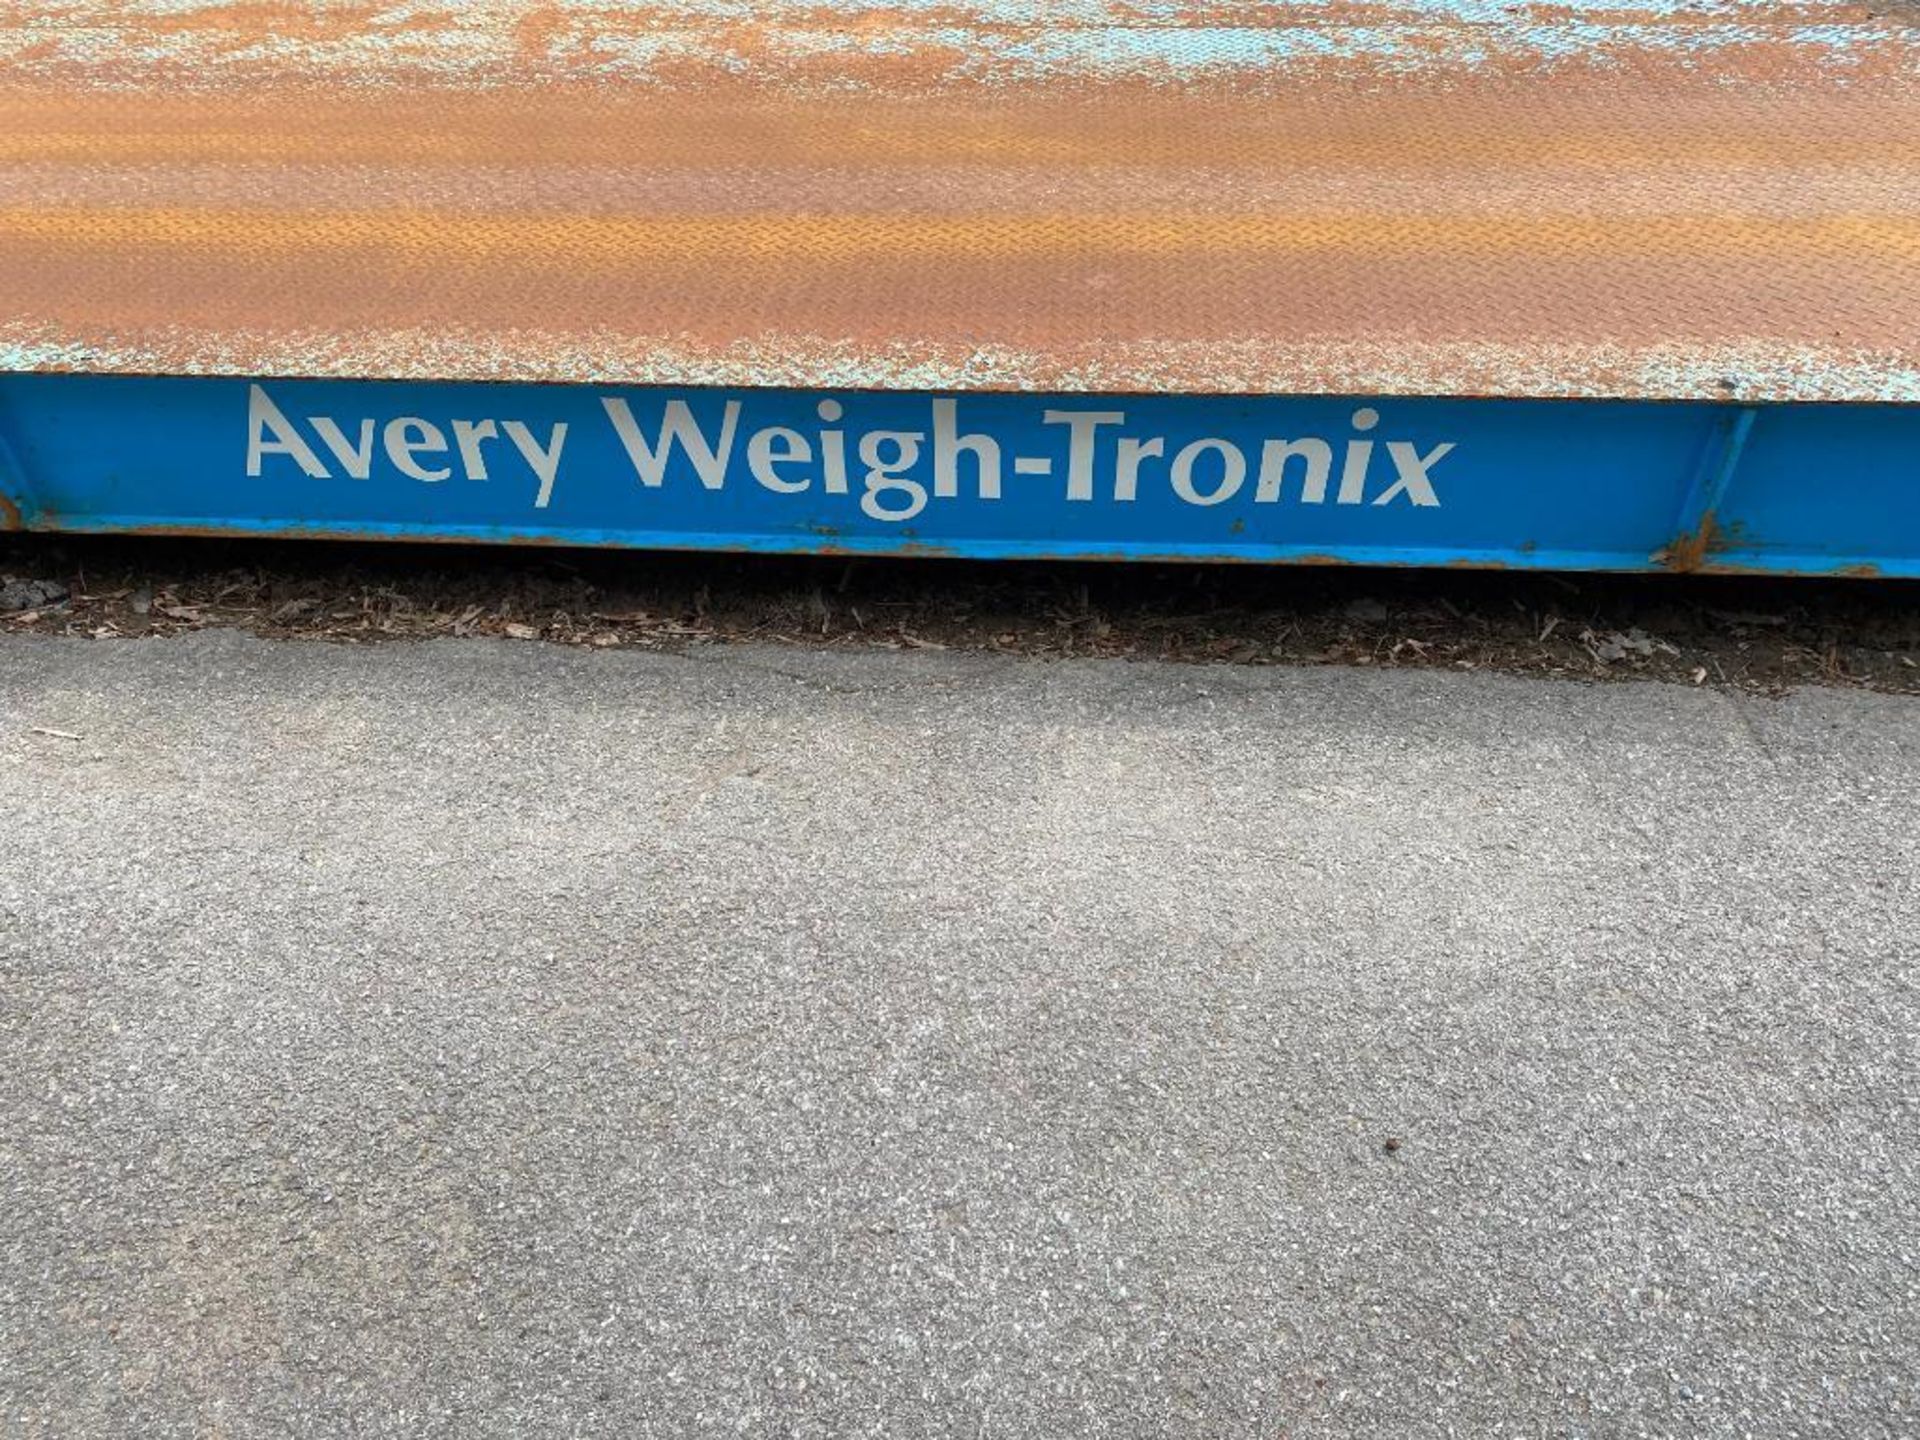 2018 Avery Weigh-Tronix 140,000 LB. Cap. Truck Scales, Digital Indicator, Deck Length: 70', S/N 1608 - Image 2 of 3